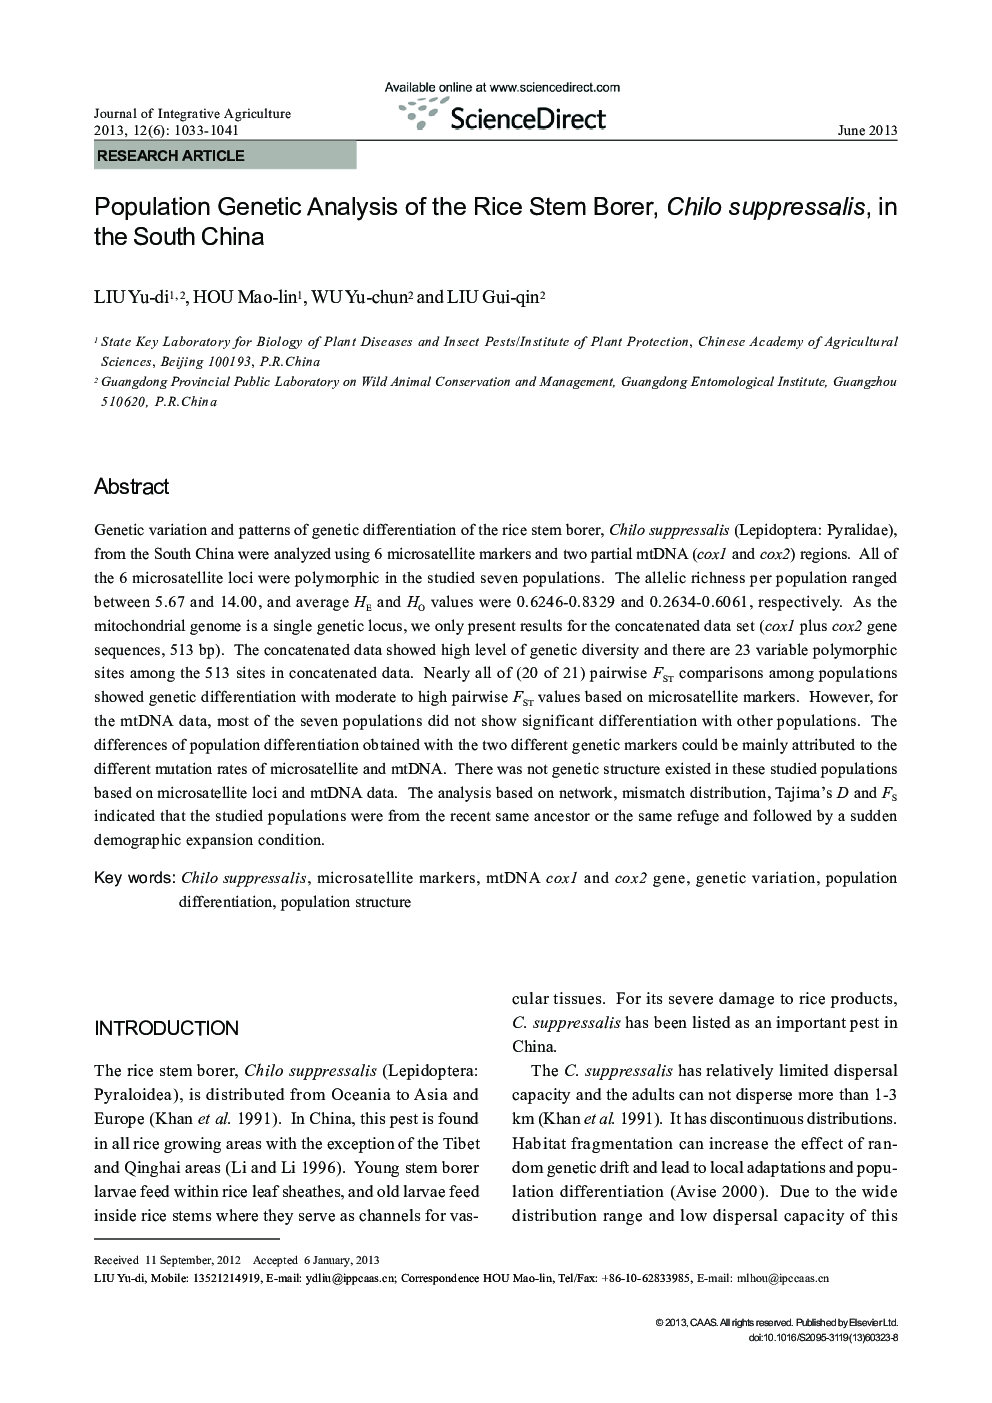 Population Genetic Analysis of the Rice Stem Borer, Chilo suppressalis, in the South China